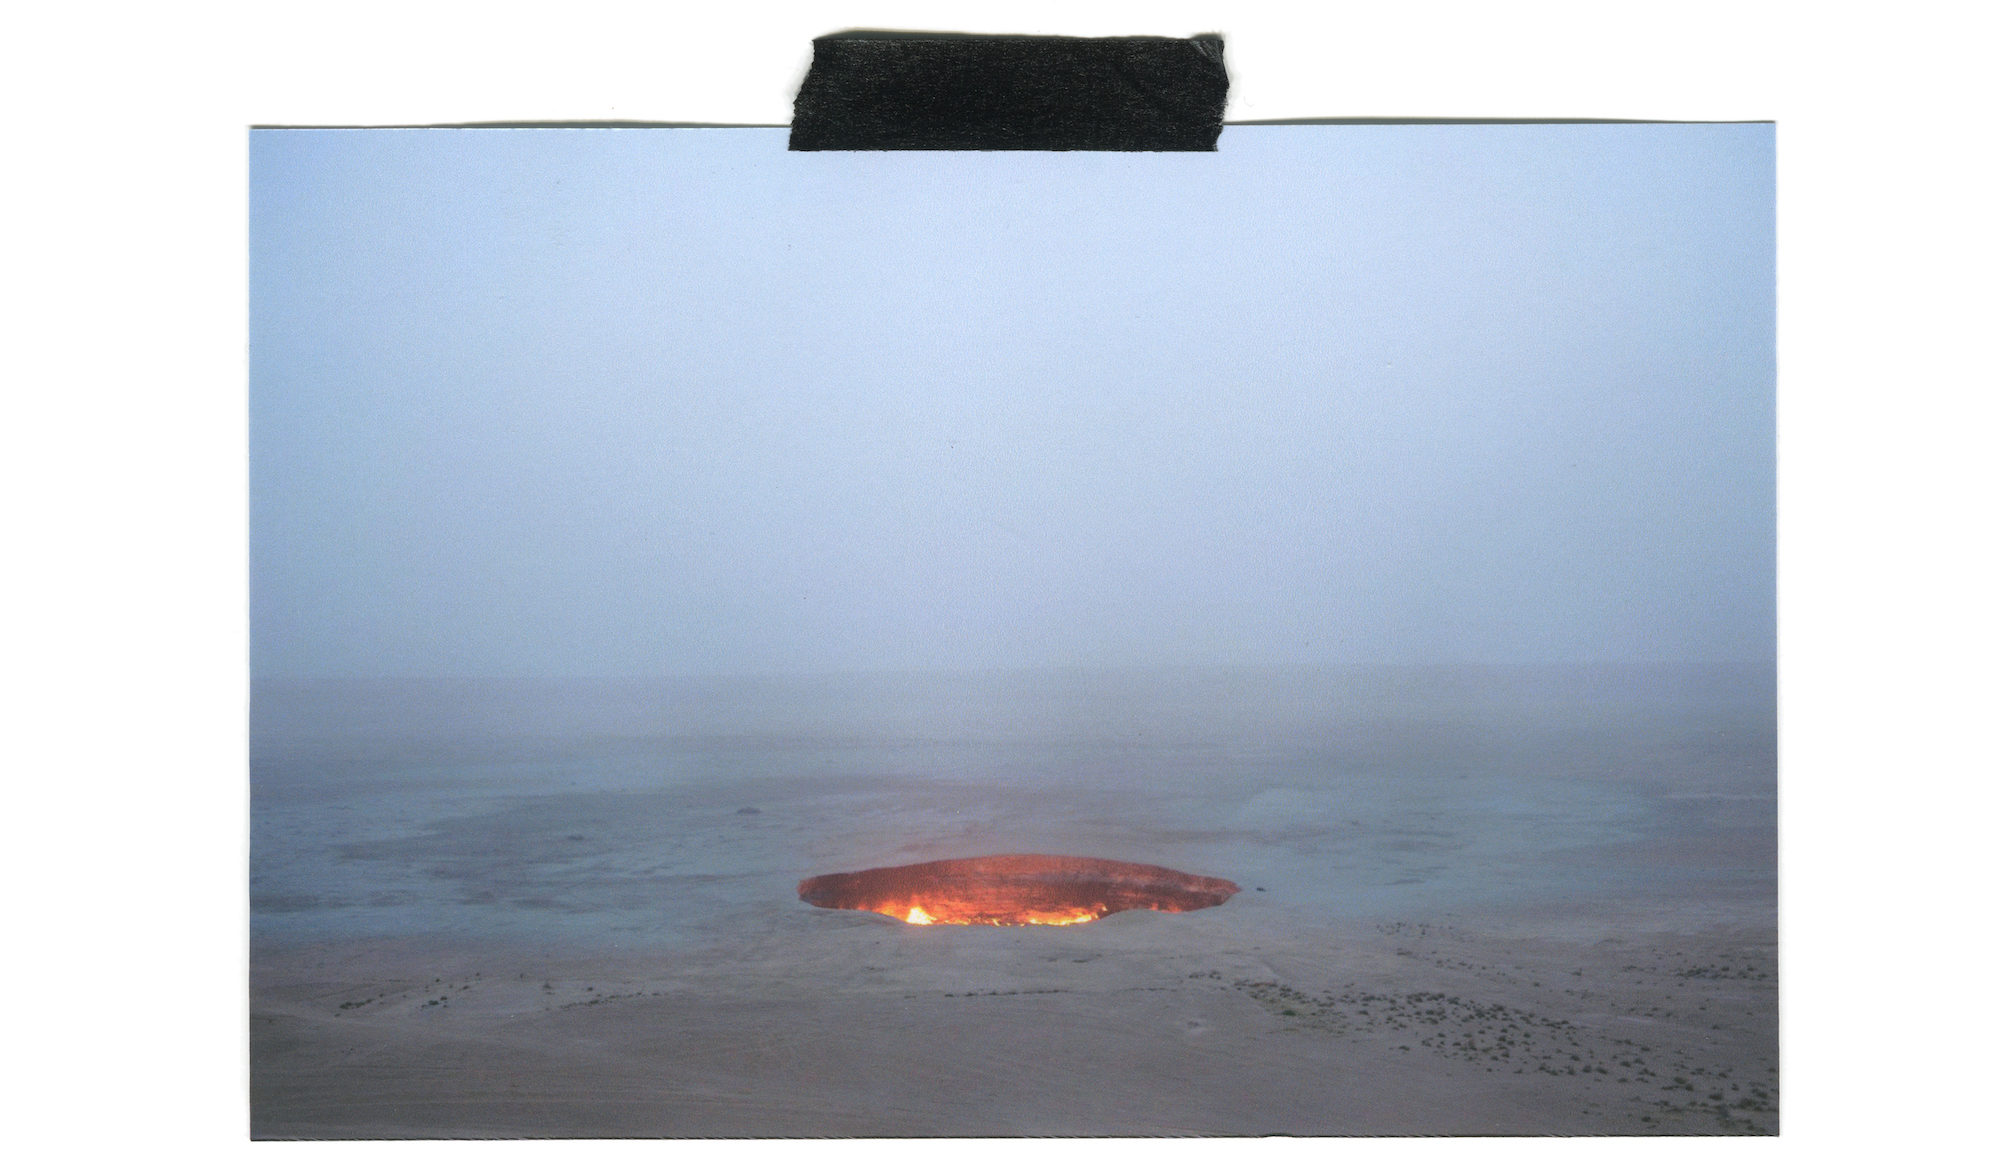 Image of the Darvaza Gas Crater in Turkmenistan held to a white wall with a piece of black tape.